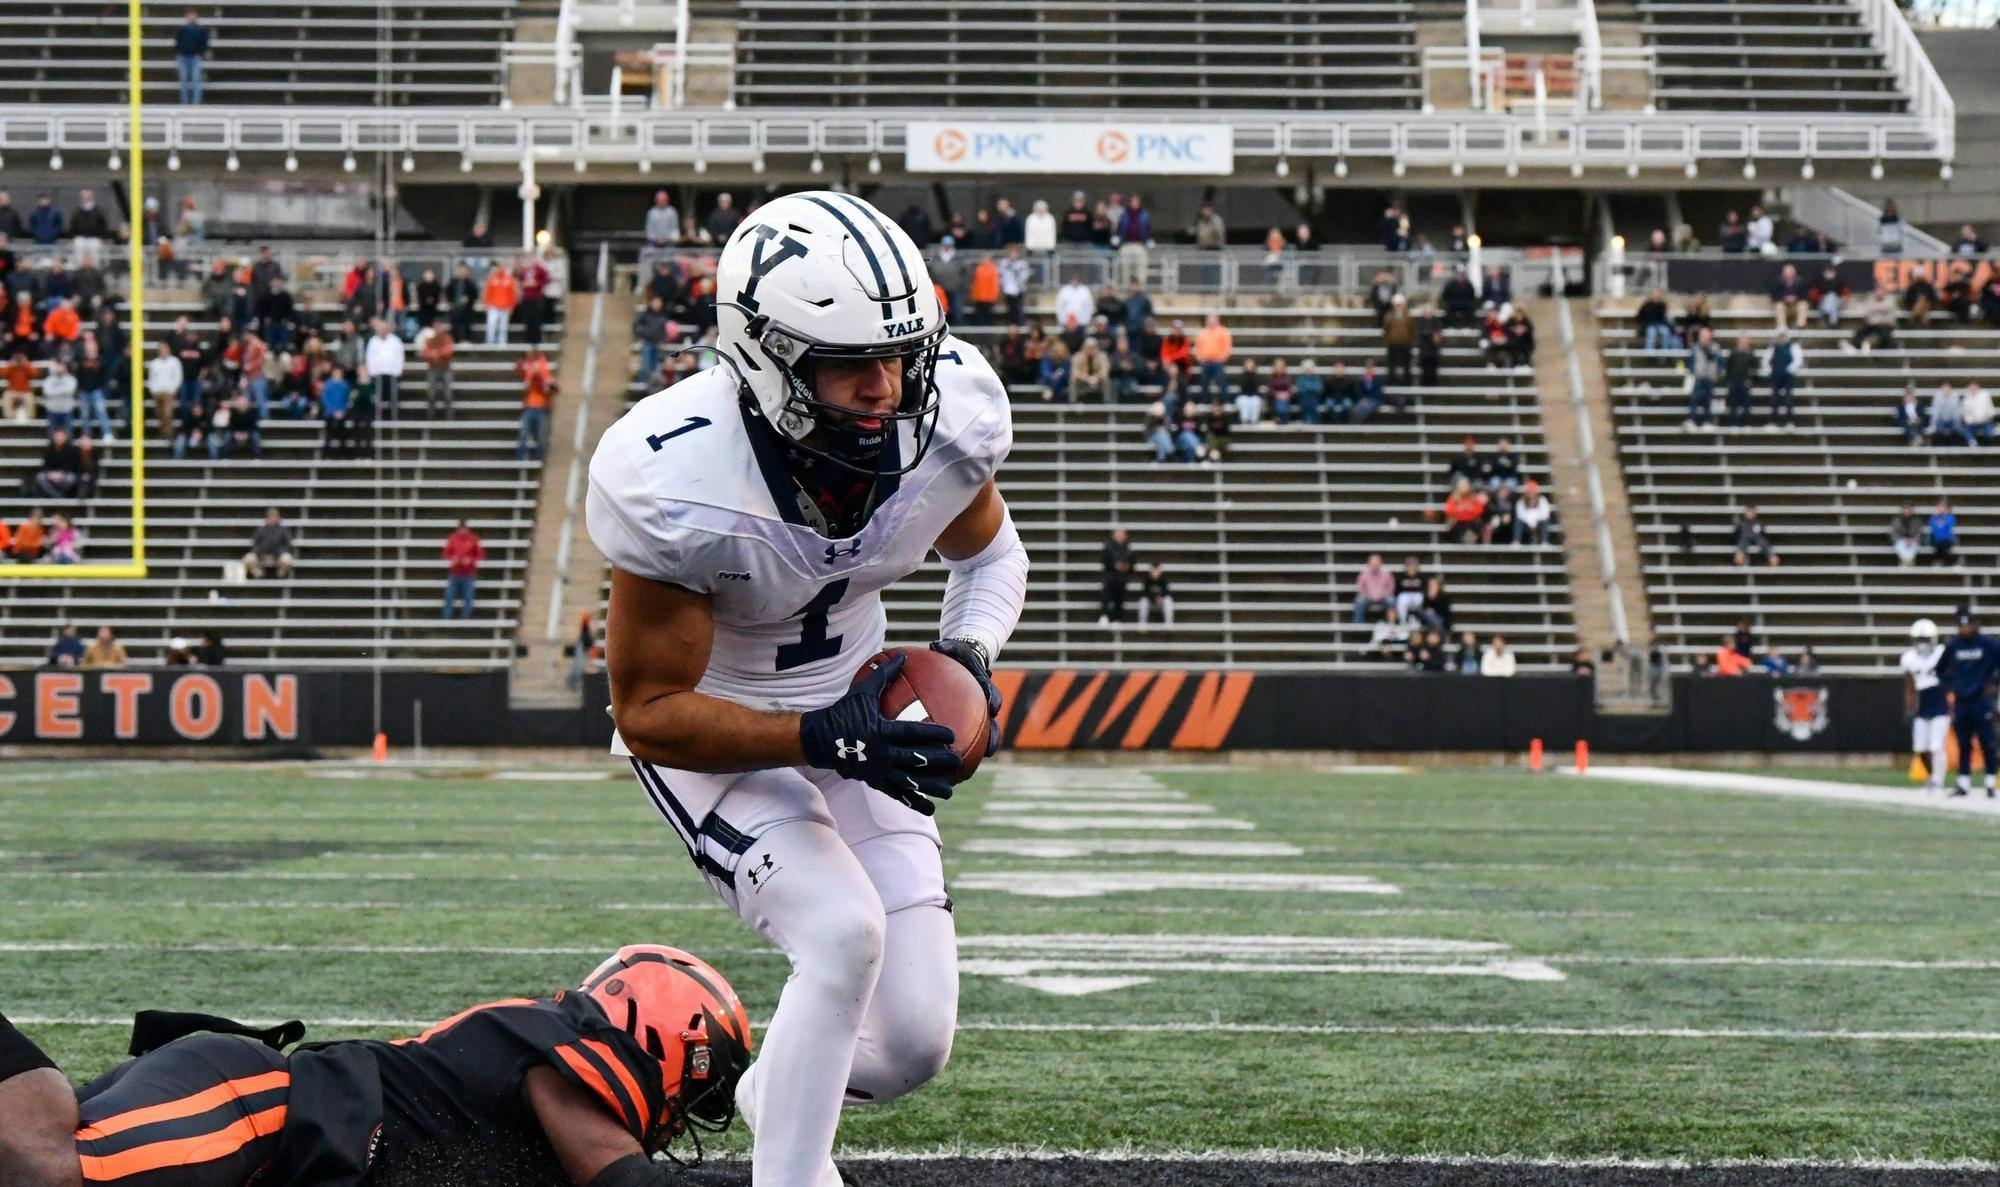 A Yale football player succesfully catching the football in the end zone while a Princeton player unsuccesfully attempts to tackle him.